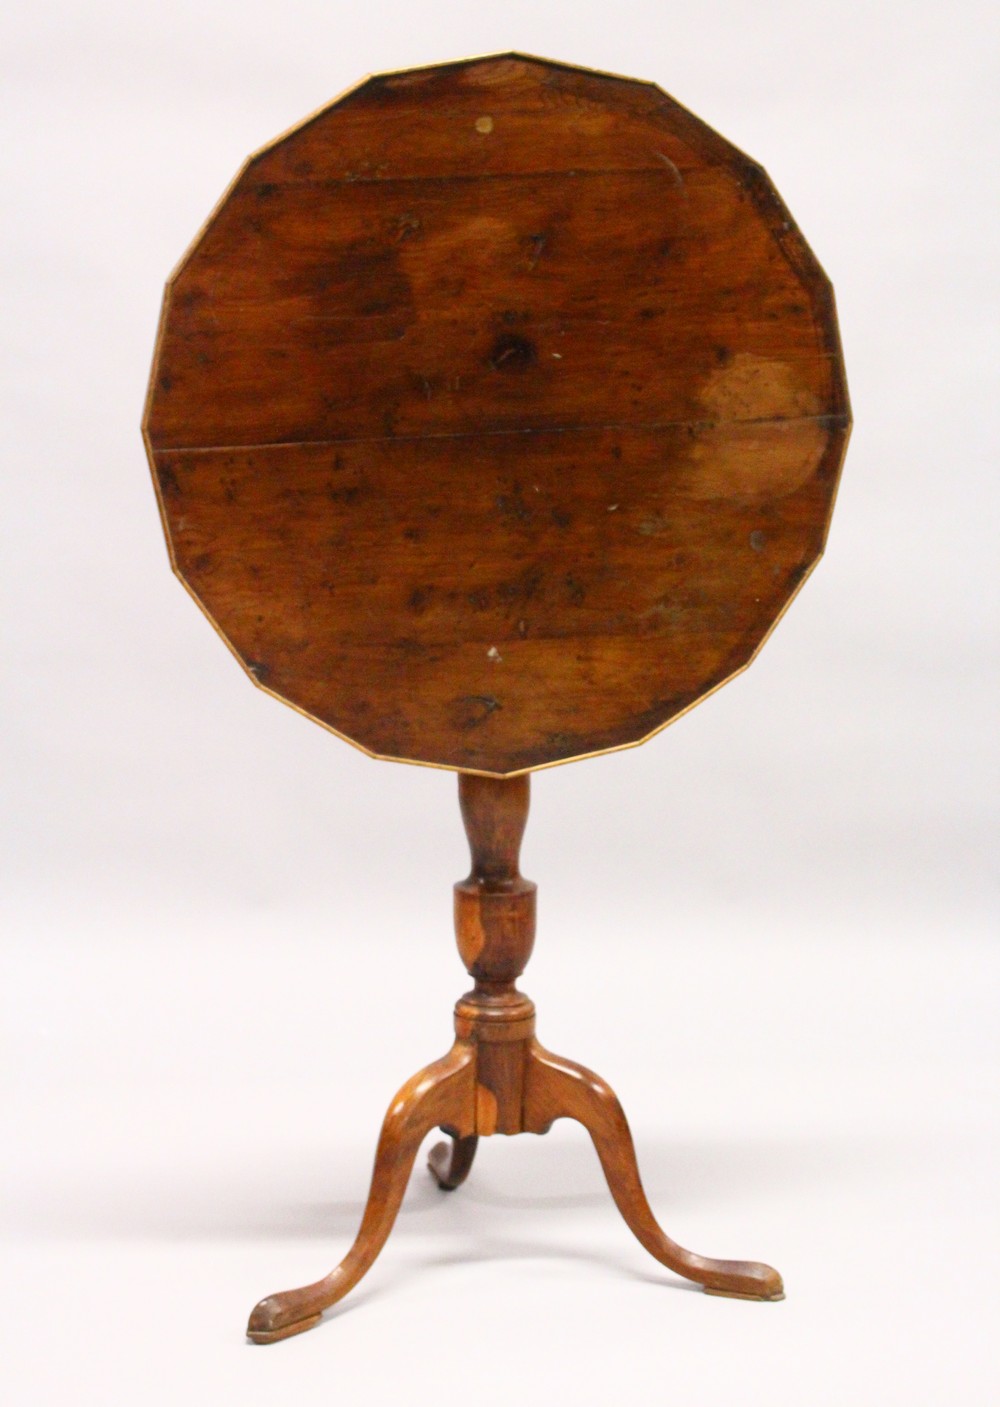 AN 18TH CENTURY YEW WOOD TILT TOP TRIPOD TABLE, with a shaped top, later edged, on a turned column